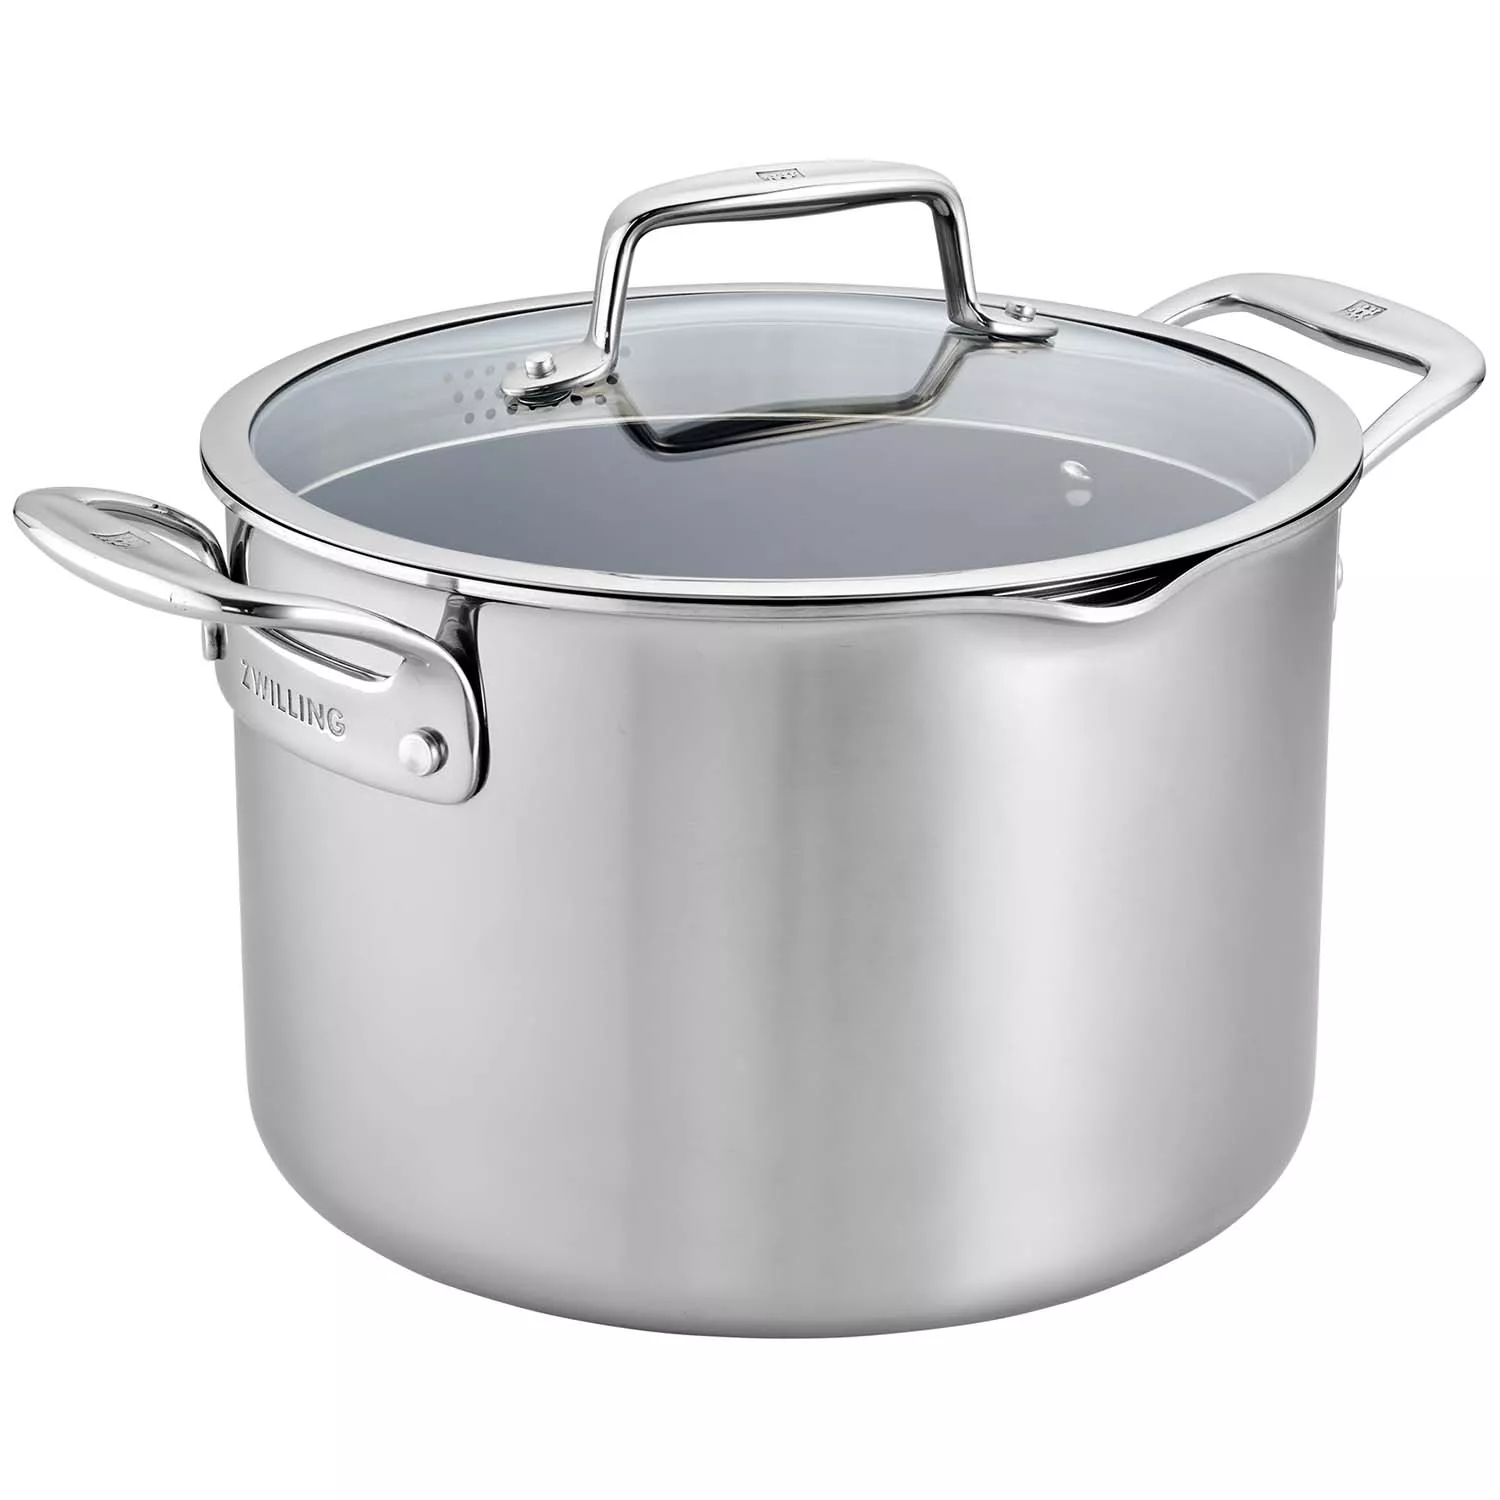 Kitchenaid 8 qt. Stainless Steel Stockpot with Lid & Reviews